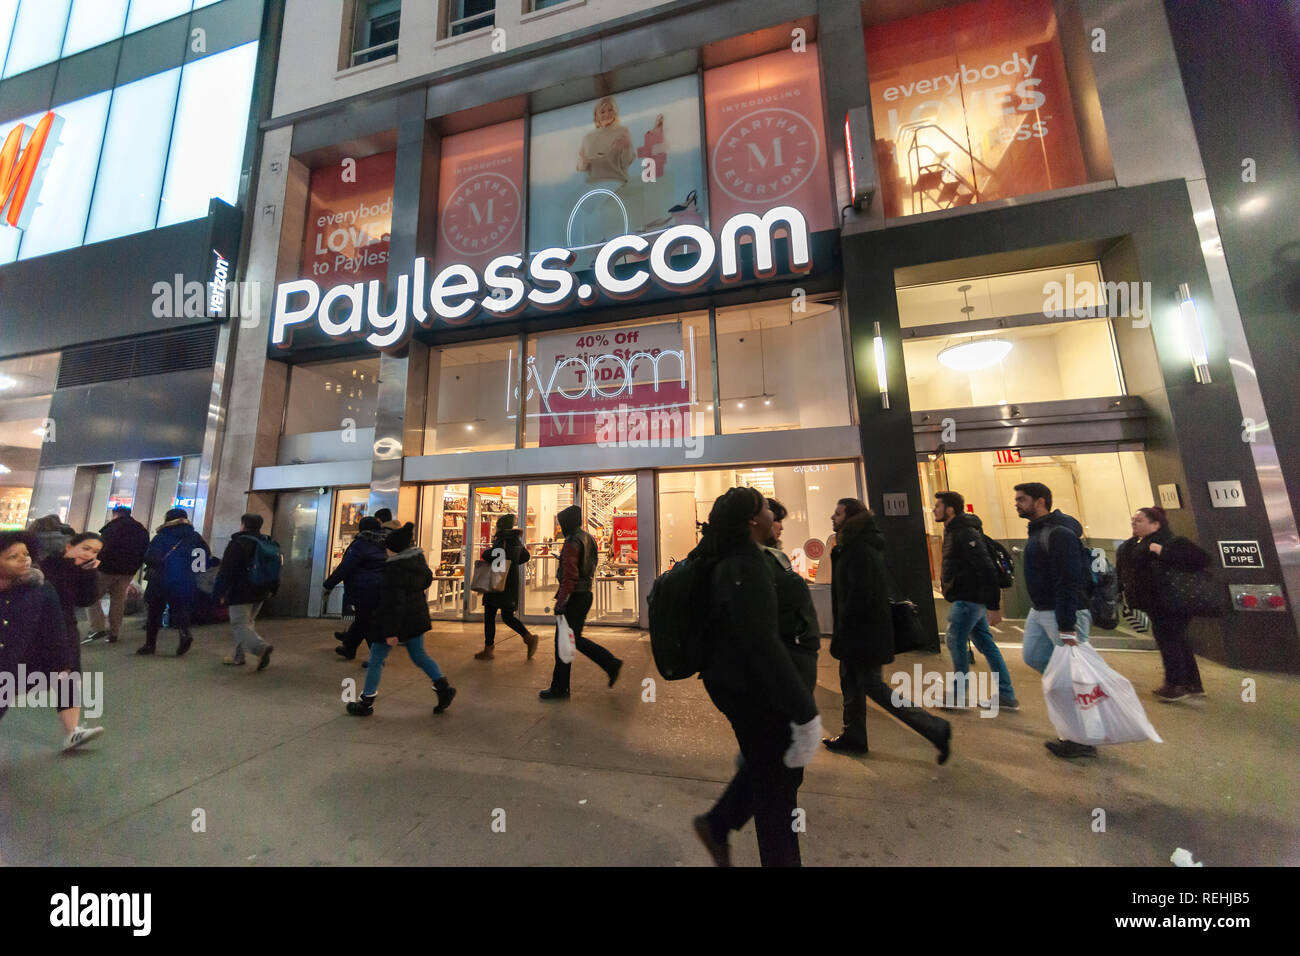 A Payless ShoeSource store in Herald Square in New York on Tuesday, January 15, 2019. The retailer is reported to have hired an advisor for evaluation of strategic alternatives which could include a sale of the company. Payless emerged from bankruptcy protection less than 18 months ago. (© Richard B. Levine) Stock Photo